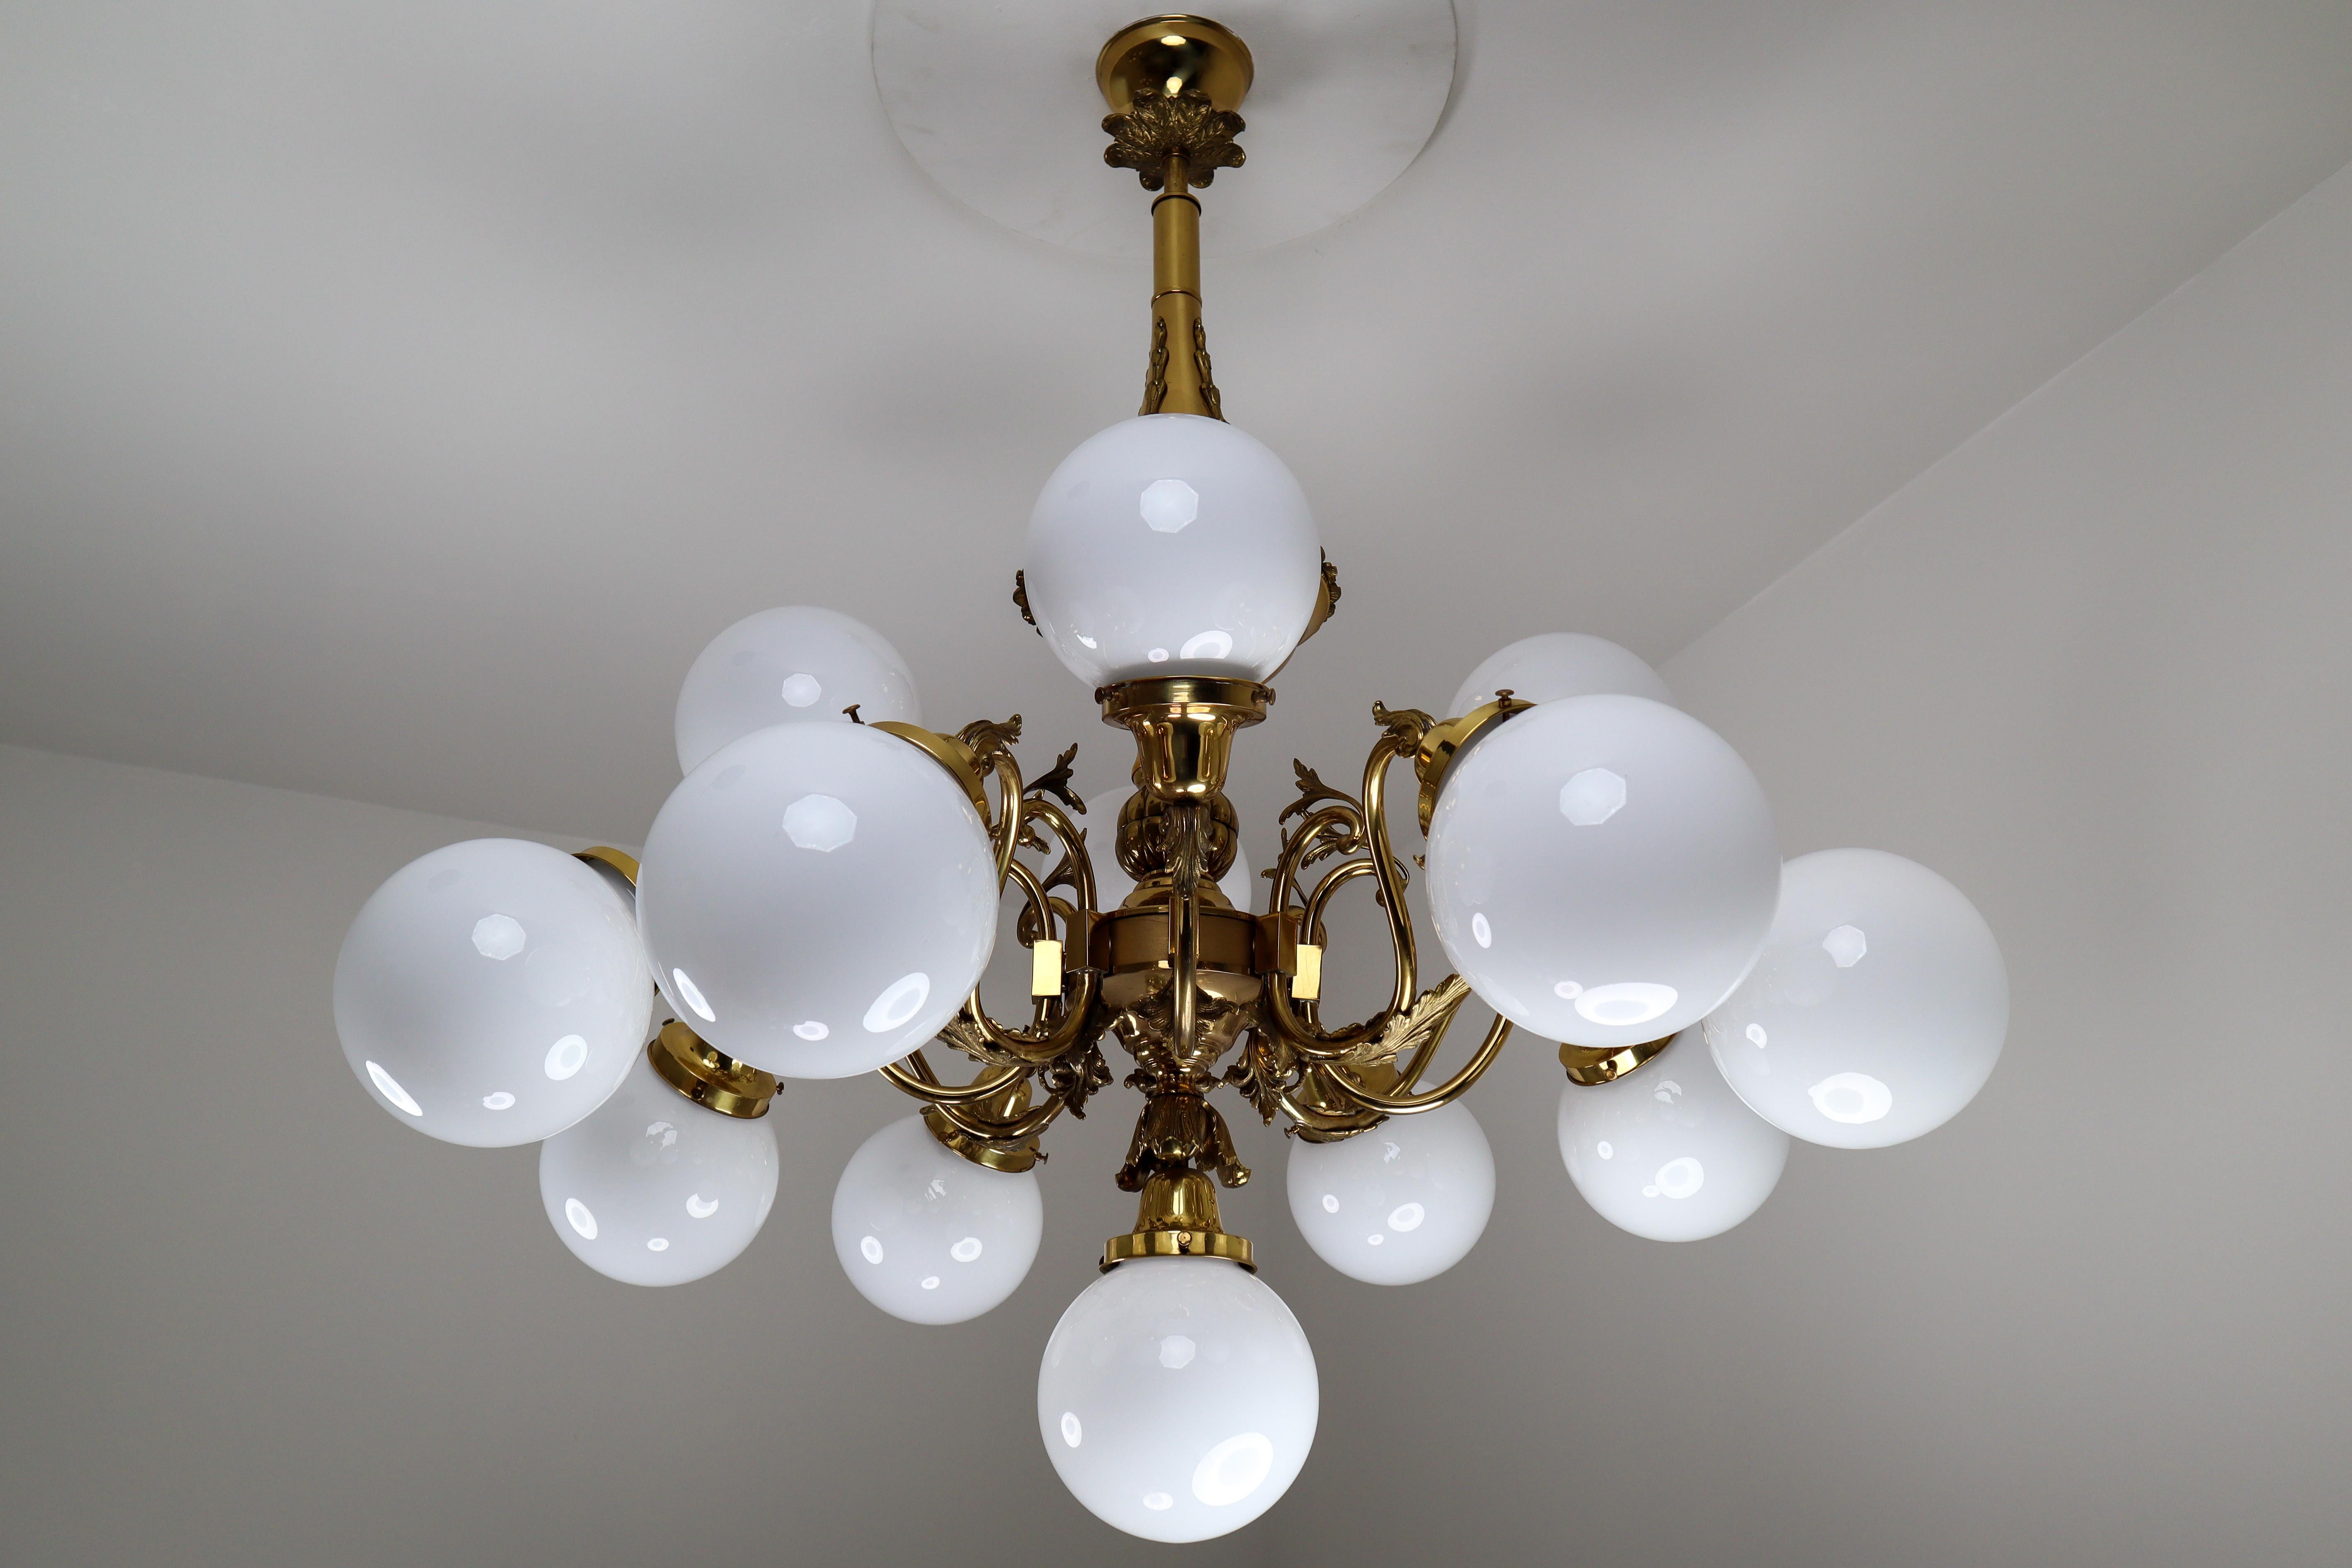 Czech Monumental Brass Chandelier and Four Wall Lights with Opaline Glass Globes